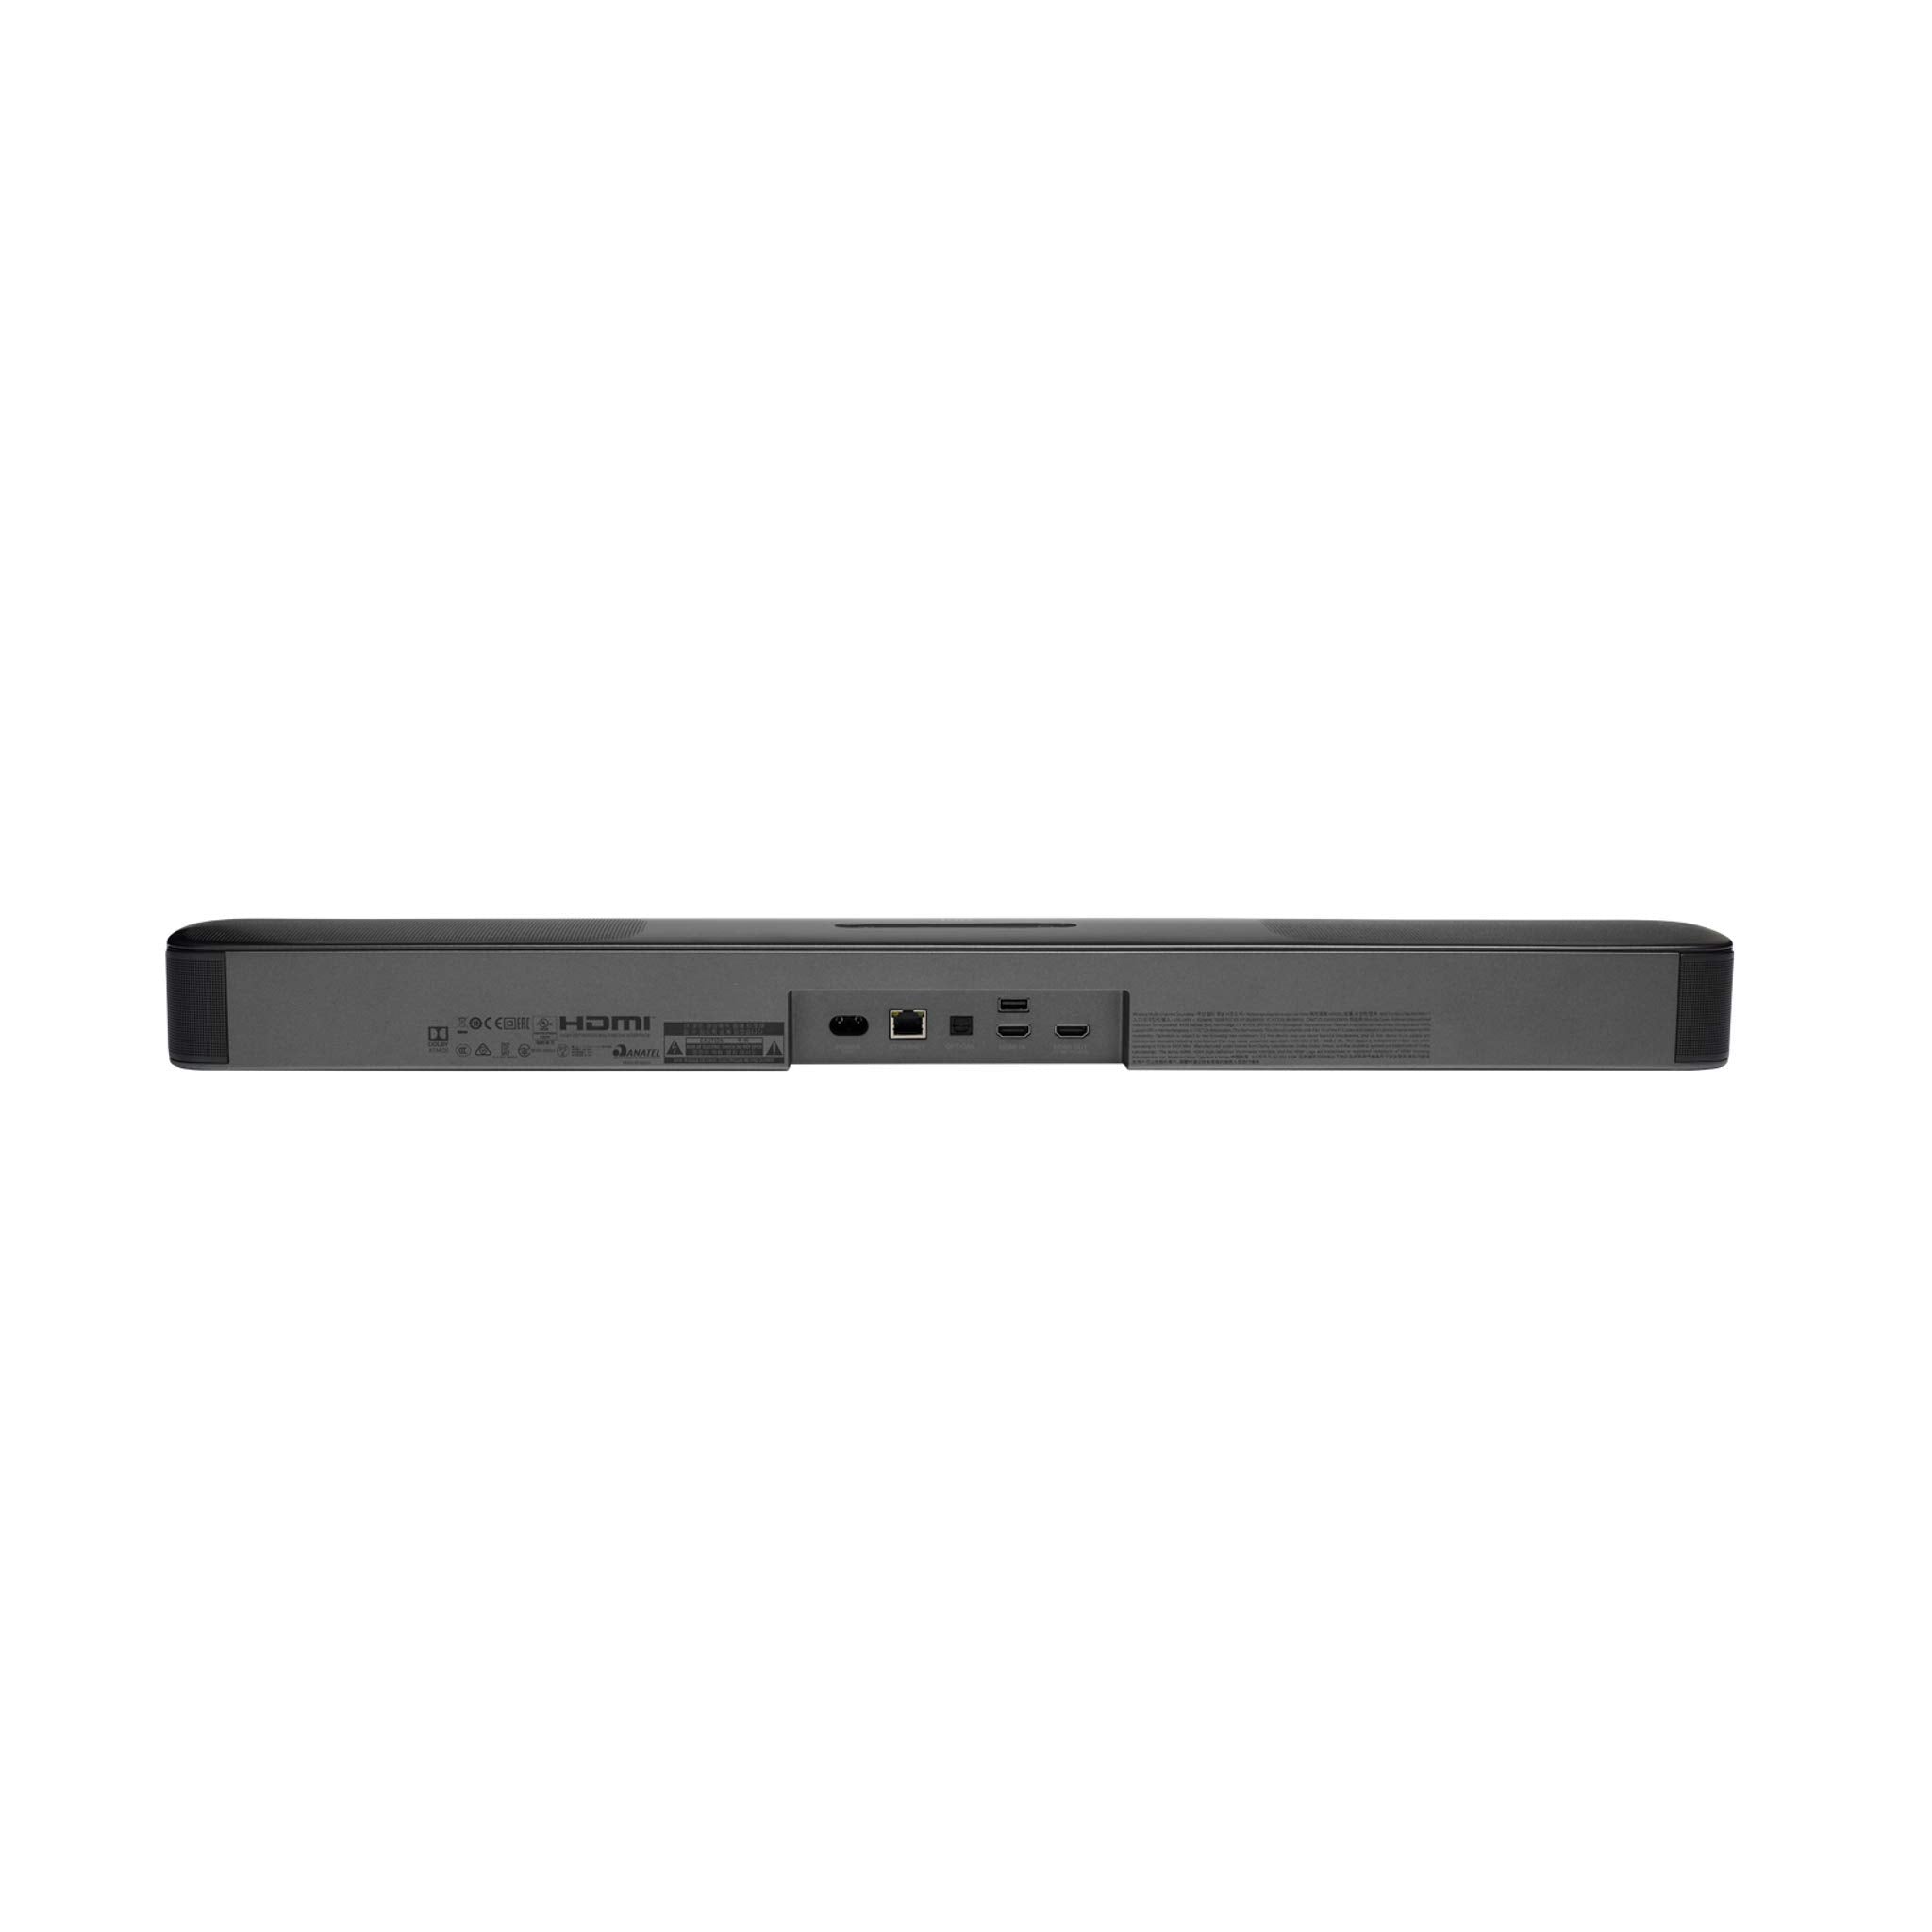 JBL Bar 5.0 Multibeam Soundbar - Bluetooth Channel Soundbar with Built-in Subwoofer, Featuring Dolby Atmos and Multibeam Surround Sound Technologies